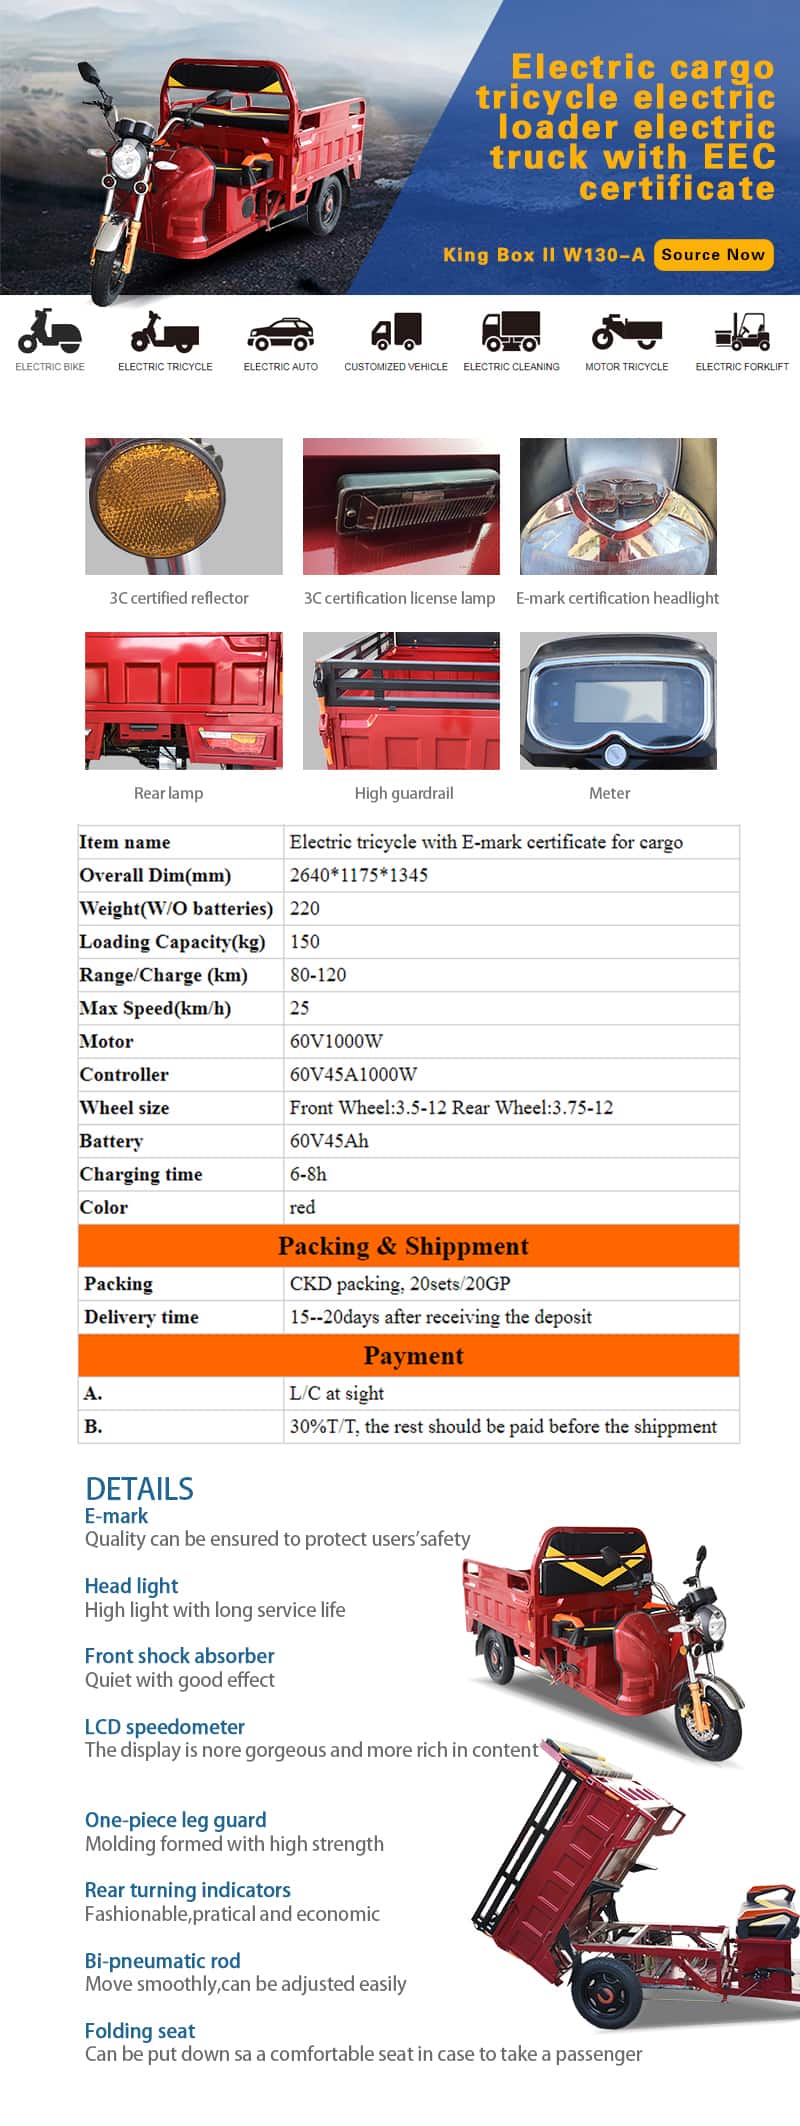 Electric tricycle with E-mark certificate for cargo